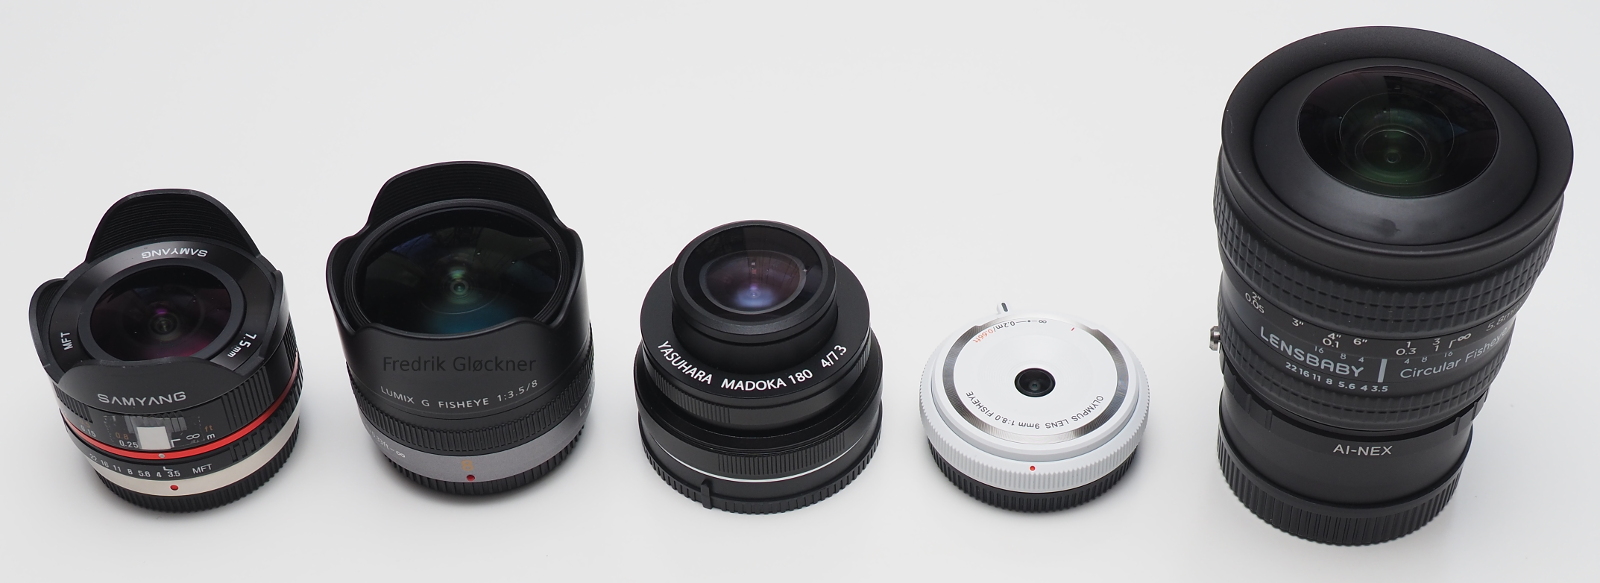 Micro 4/3rds Photography: Fisheye lenses compared